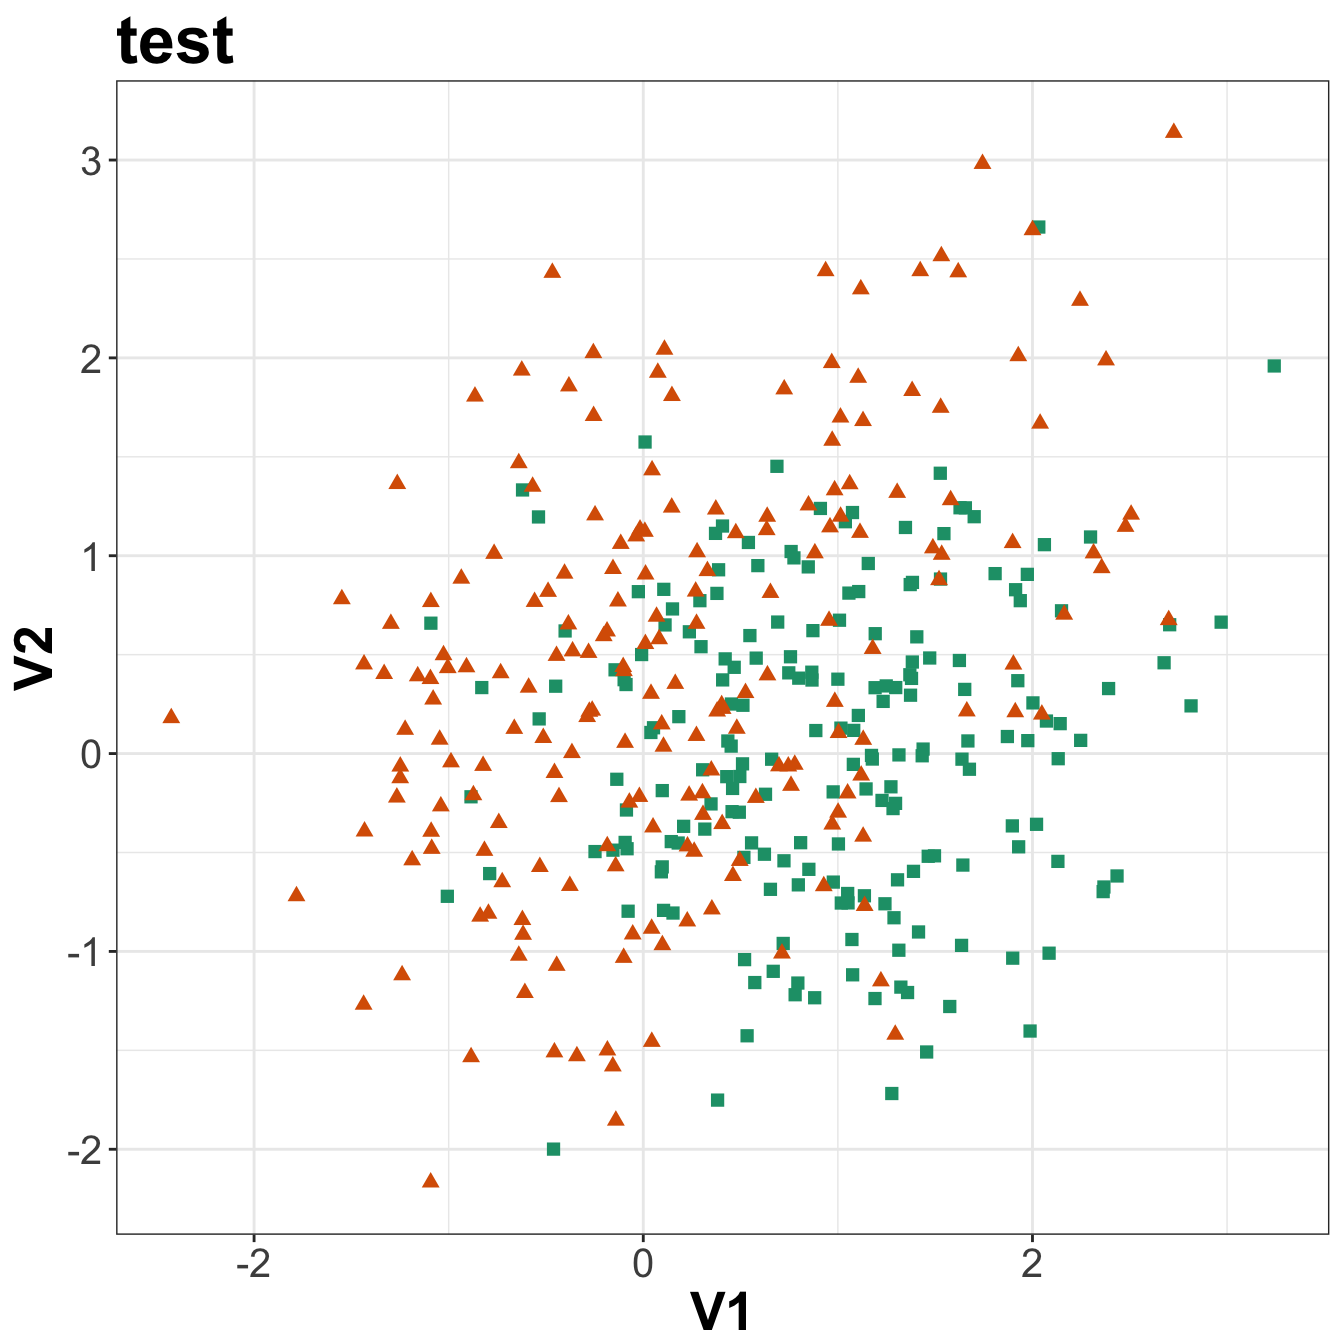 Scatterplots of the simulated training and test data sets that will be used in the demonstration of binary classification using _k_-nn